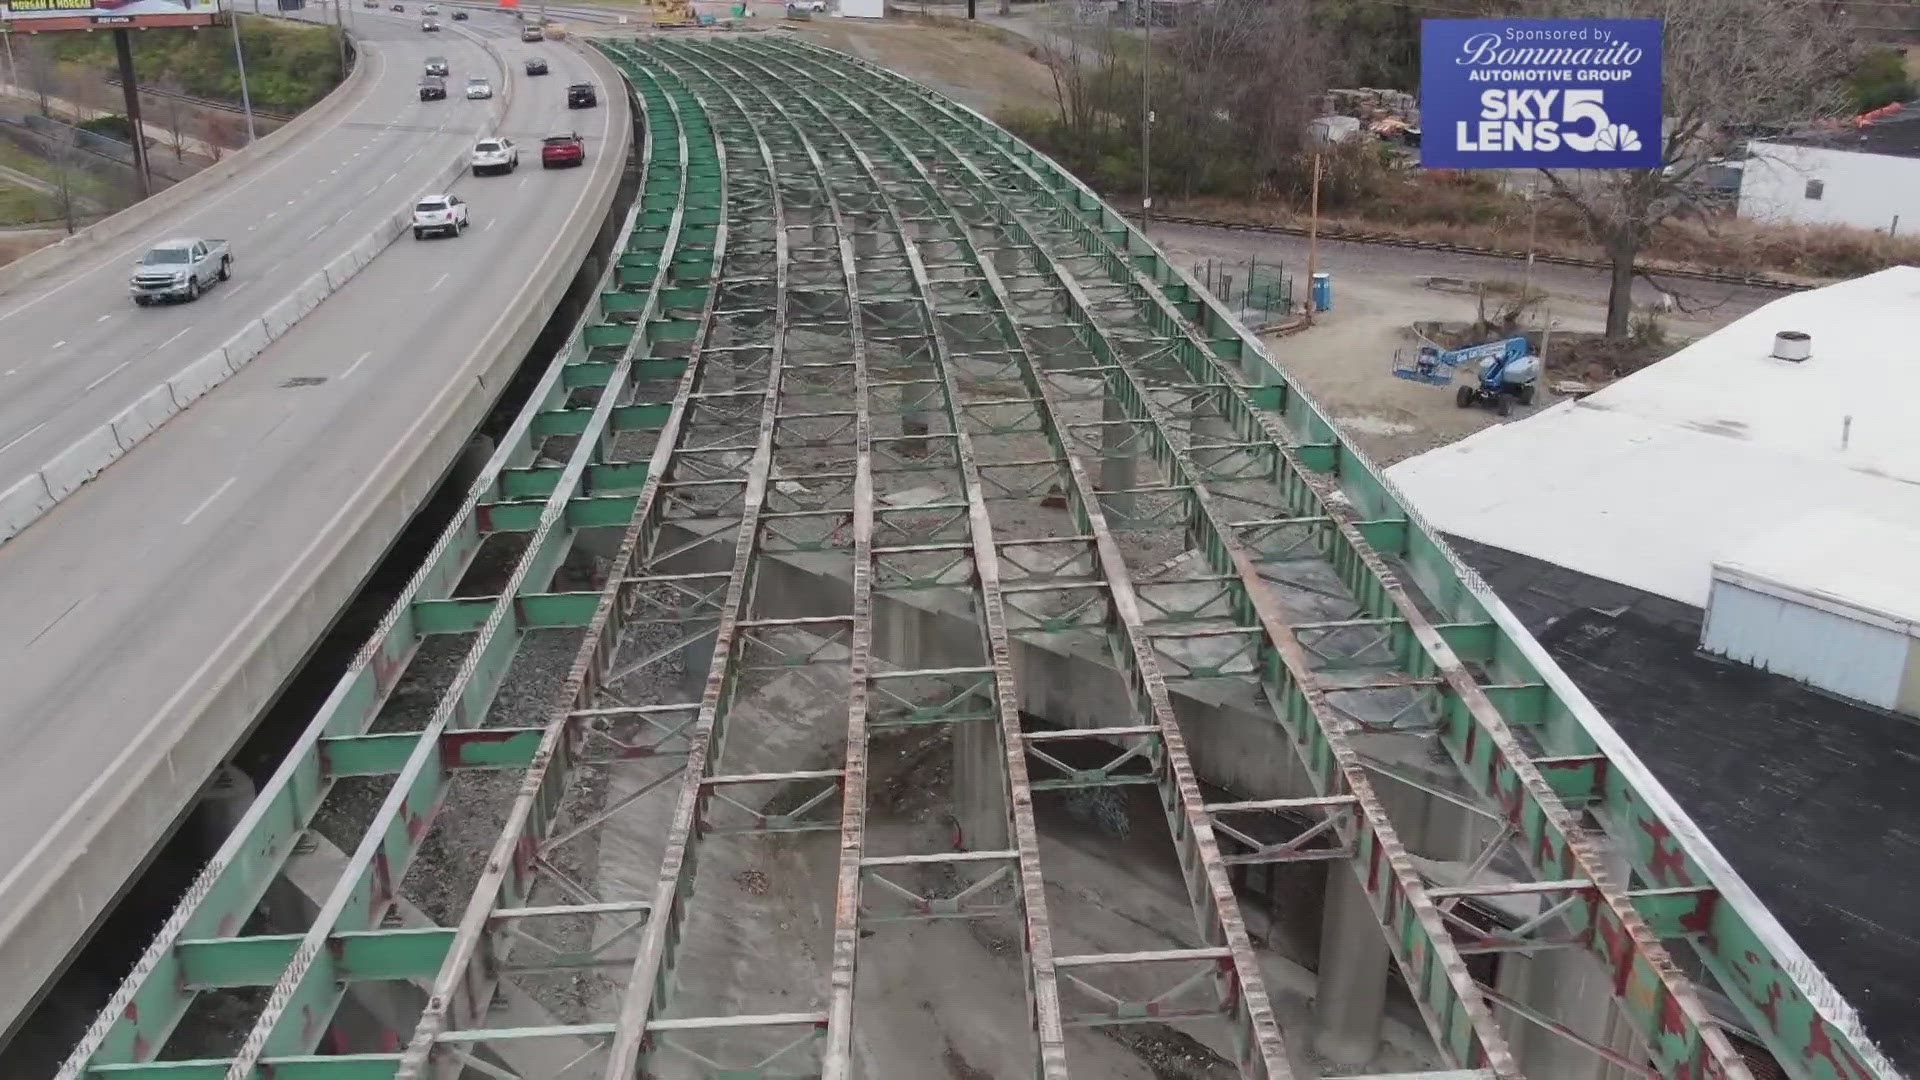 MoDOT now has a plan to fix a bridge along Interstate 55. The work should be completed in the fall of 2025, with resurfacing work continuing into the year 2026.